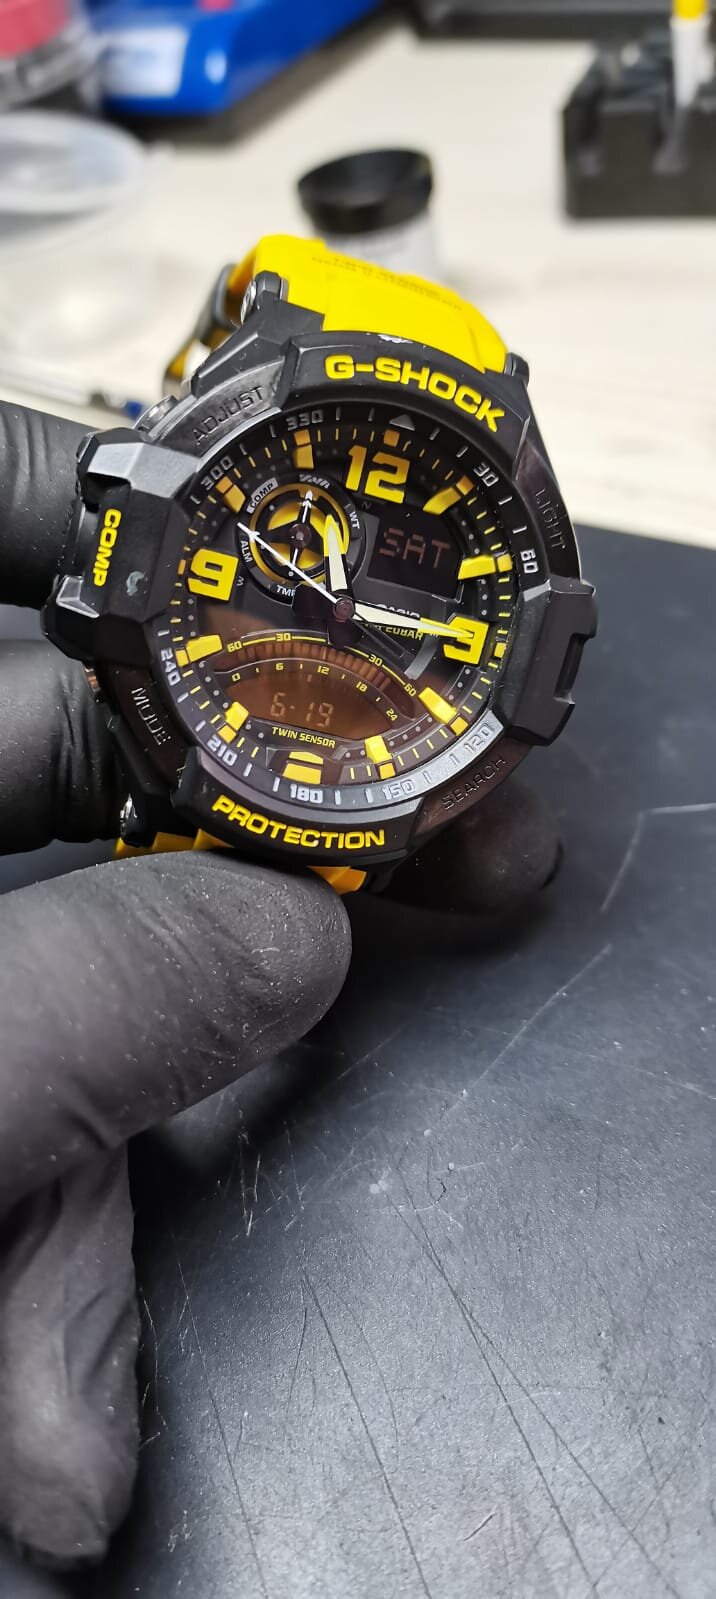 Casio G Shock watch GA - 1000 5302 watch repair, replacement compass button  and remedial work to movement from St Katherines and Wapping, London |  Watches Fixed | Watch Repairs | Latest Watch News | Watch Hub